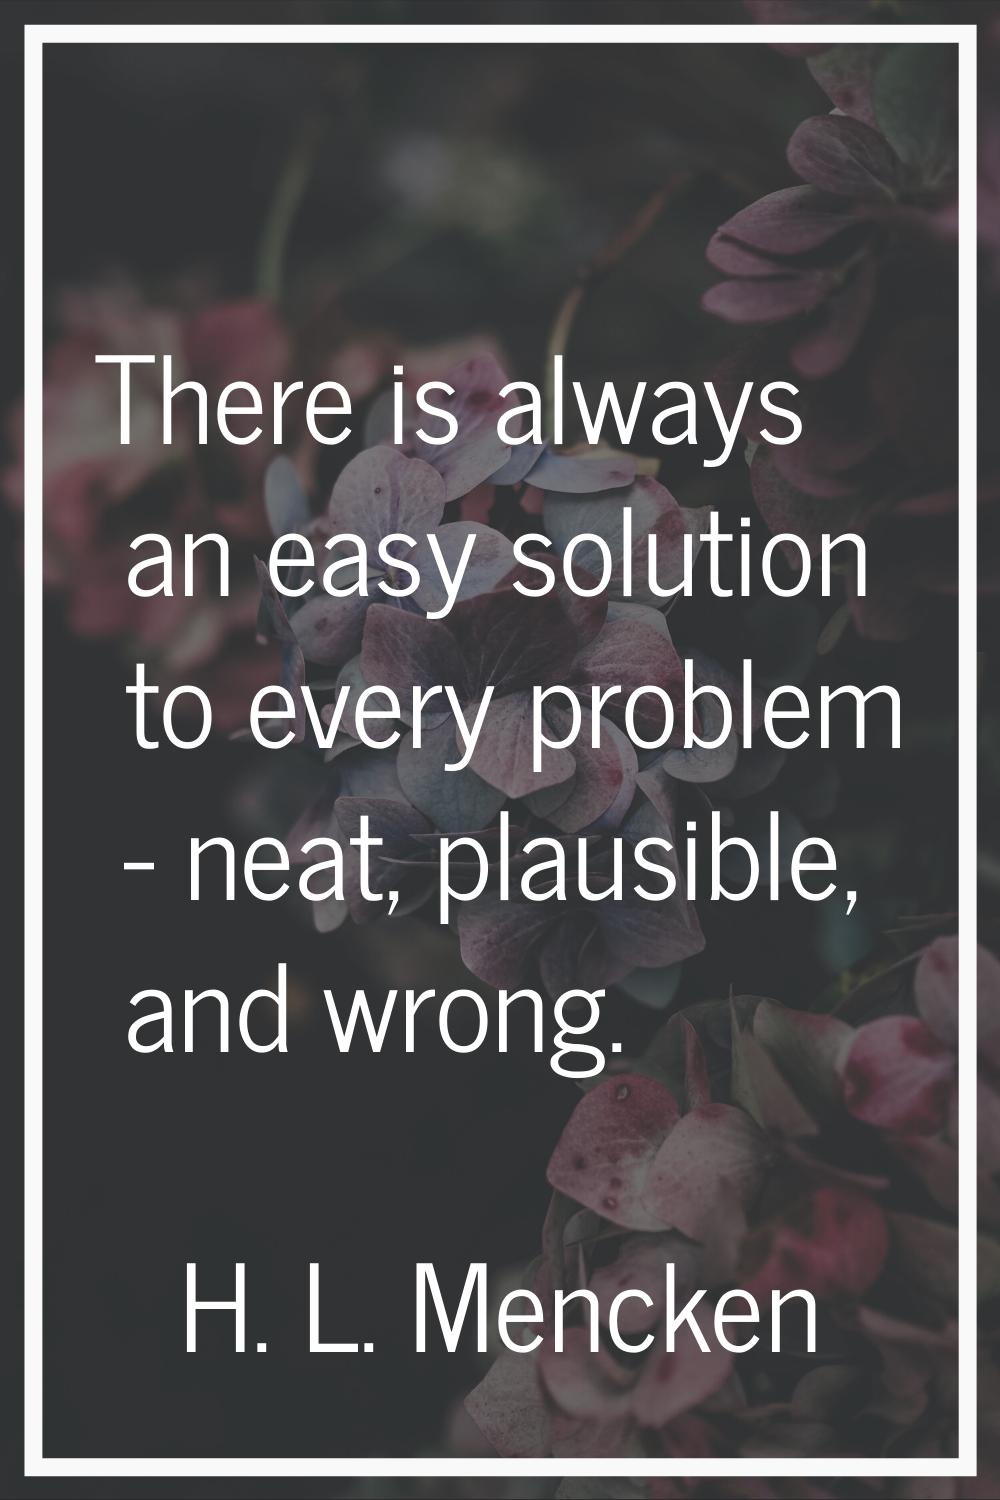 There is always an easy solution to every problem - neat, plausible, and wrong.